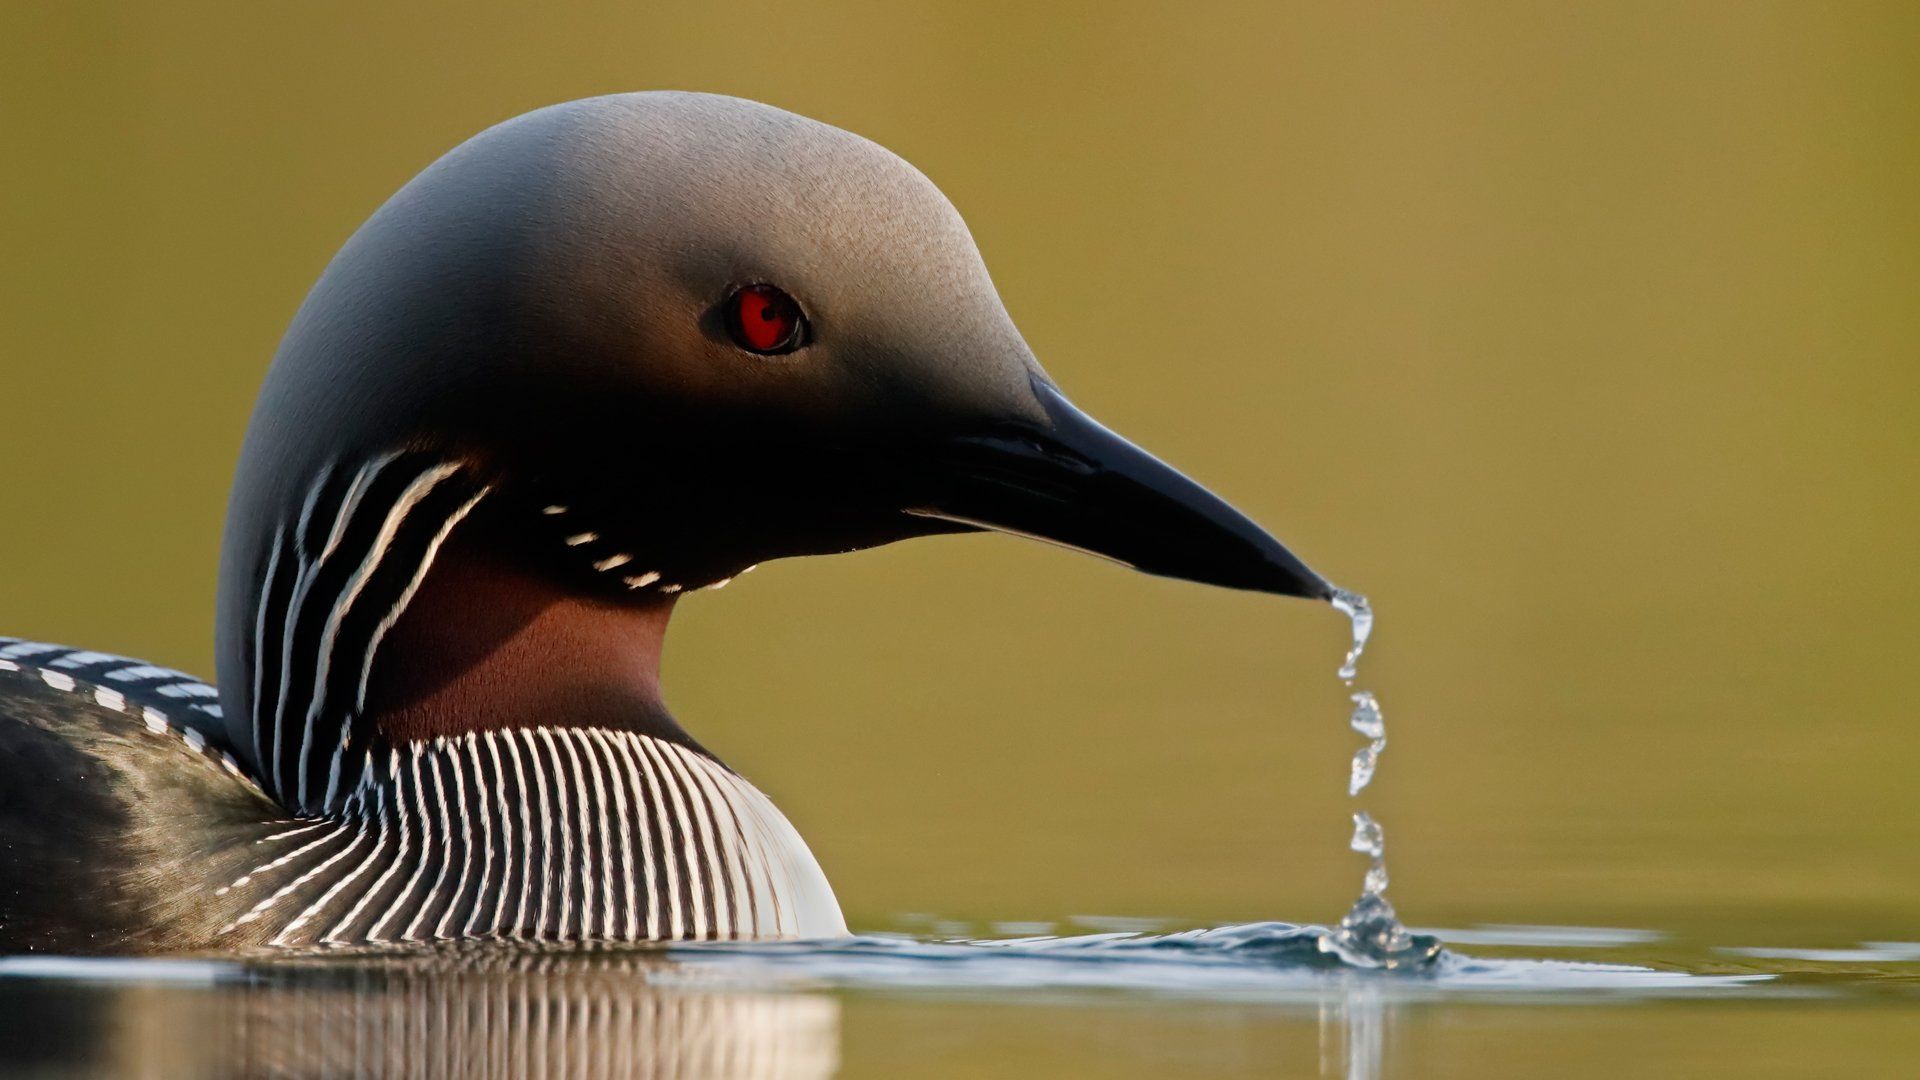 Canon EOS 90D - Markus Veresvuo - Black Throated Diver Drinking